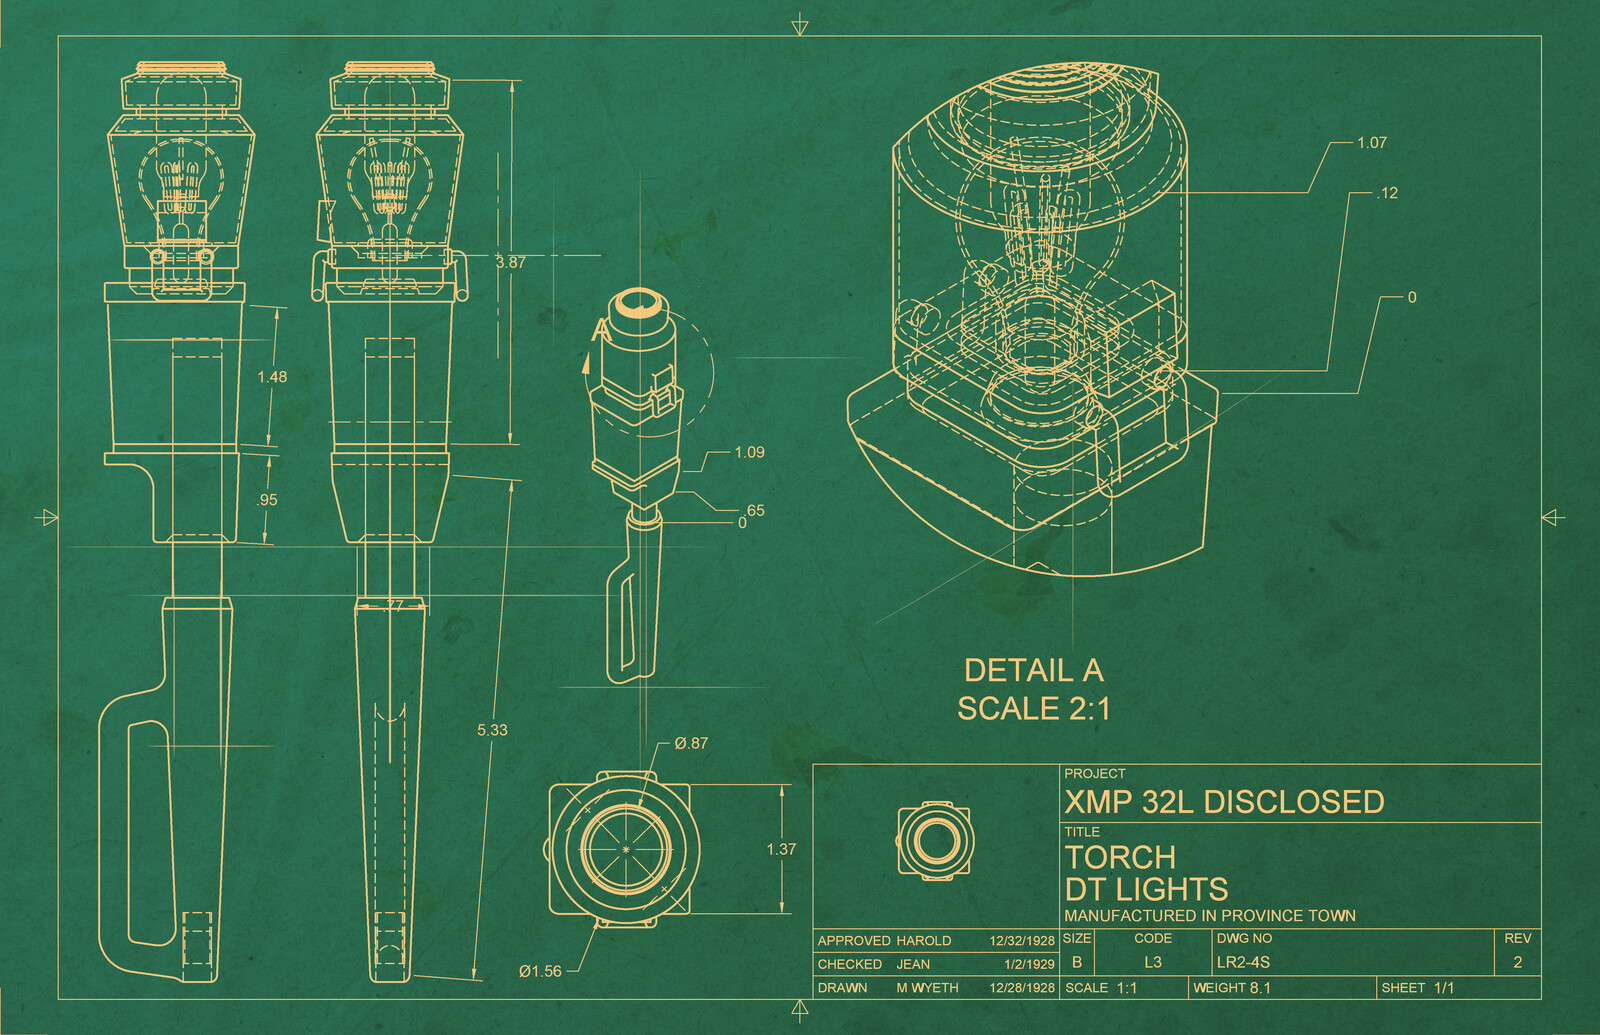 Design sheet for the torch